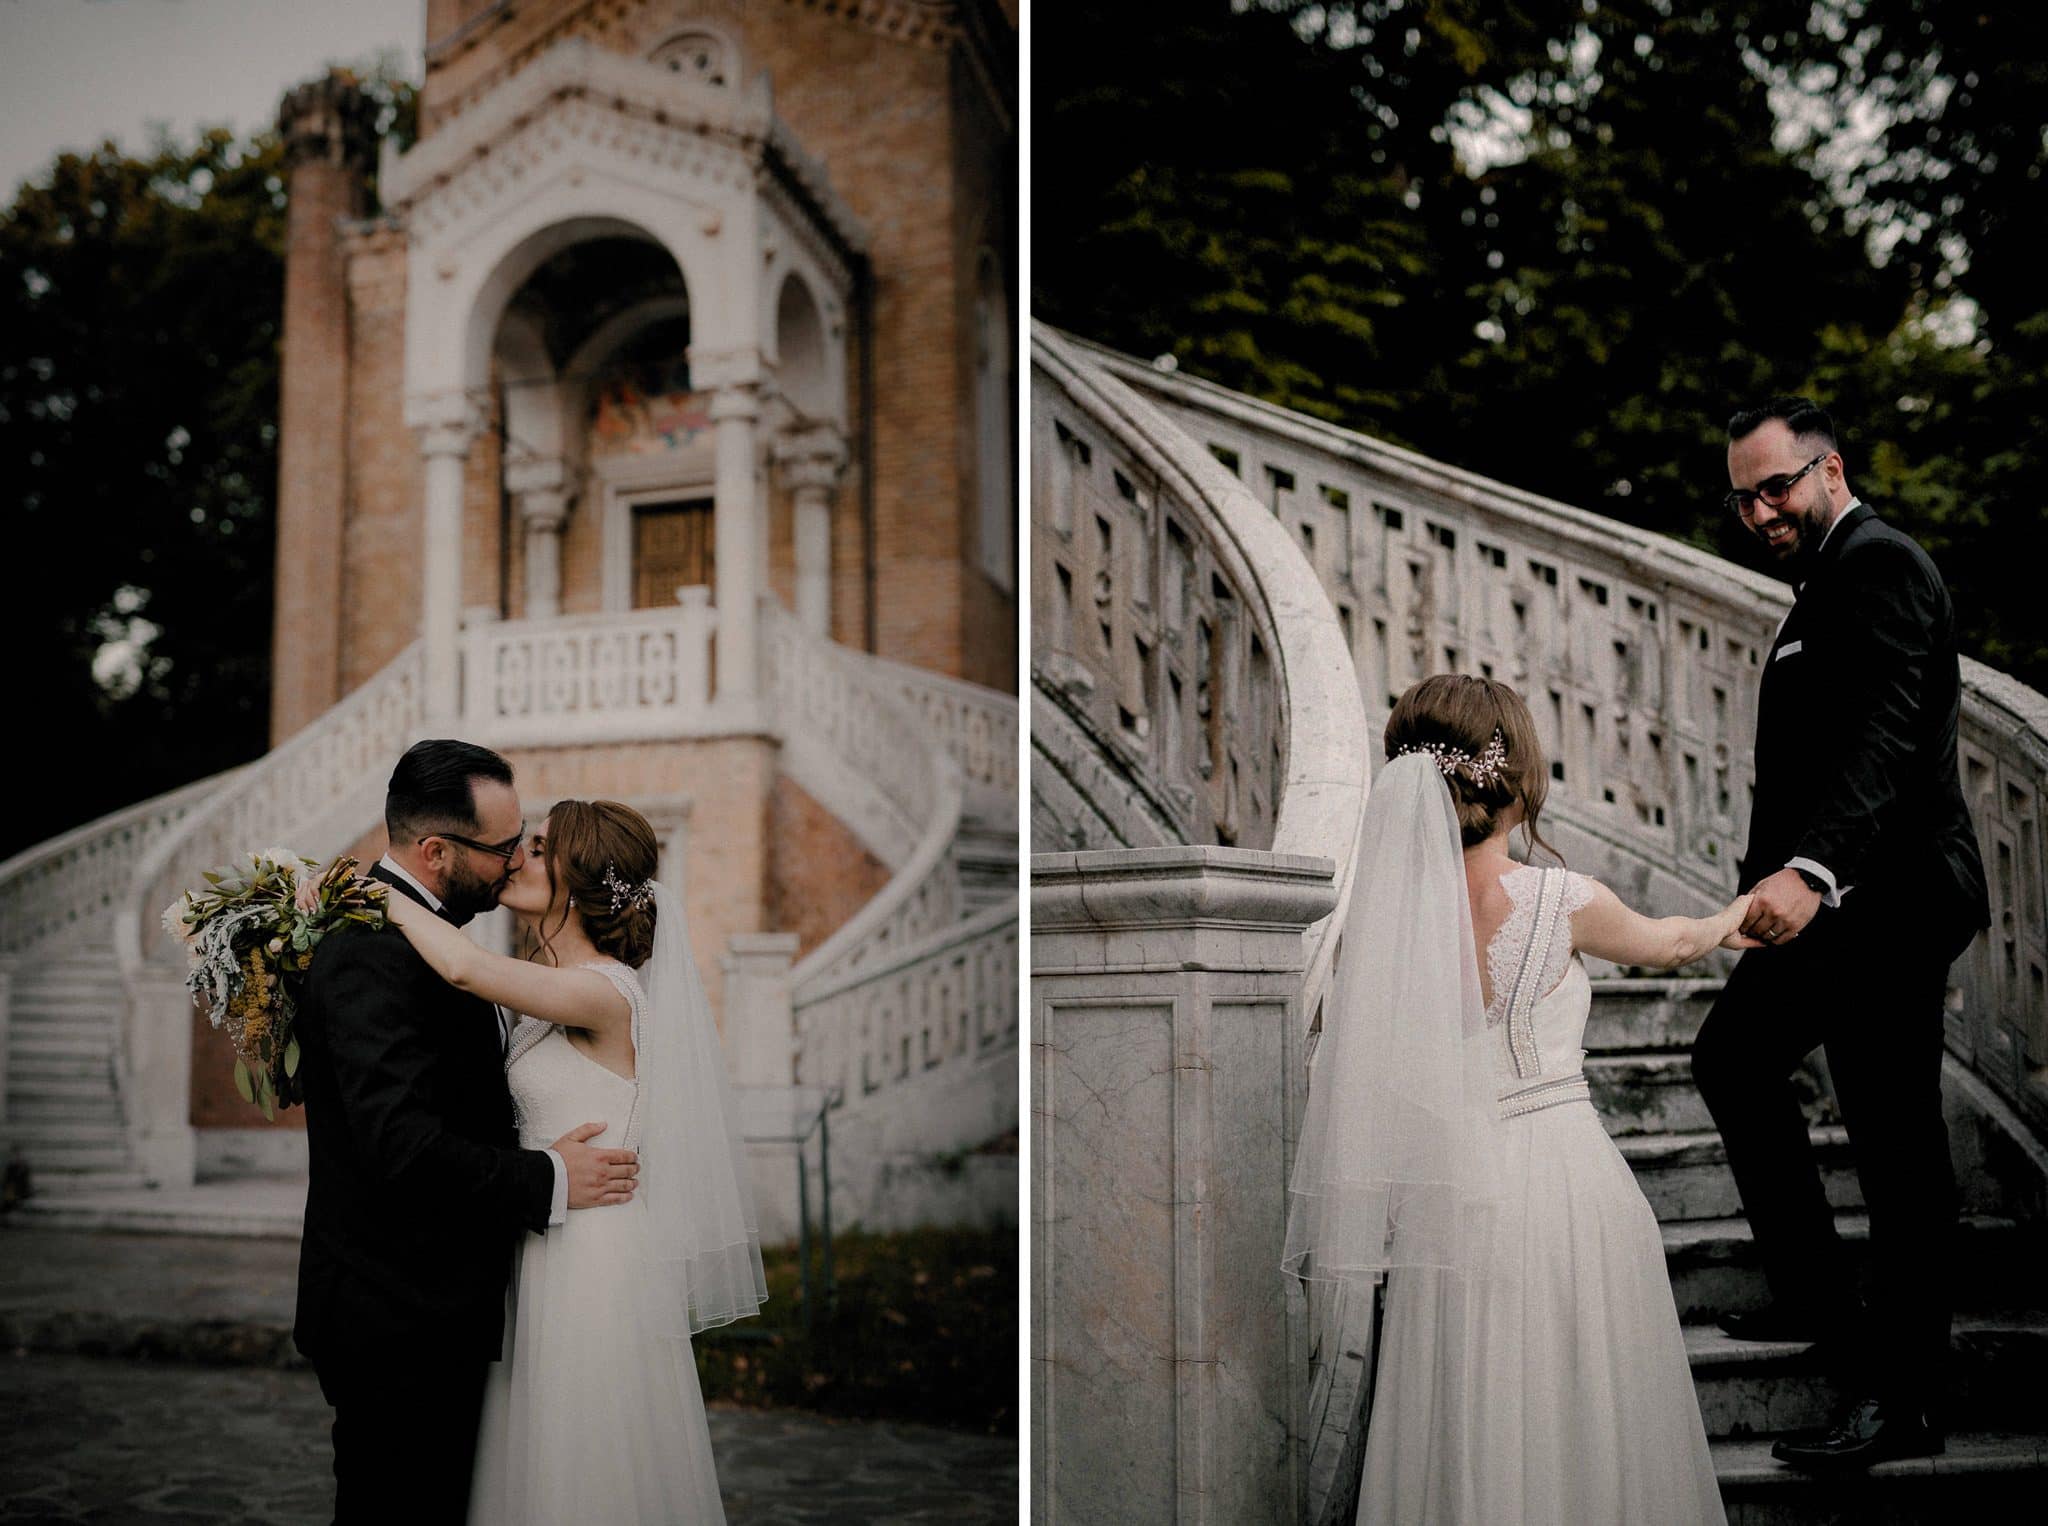 elegant architectural details as a background to the bride and groom's kiss